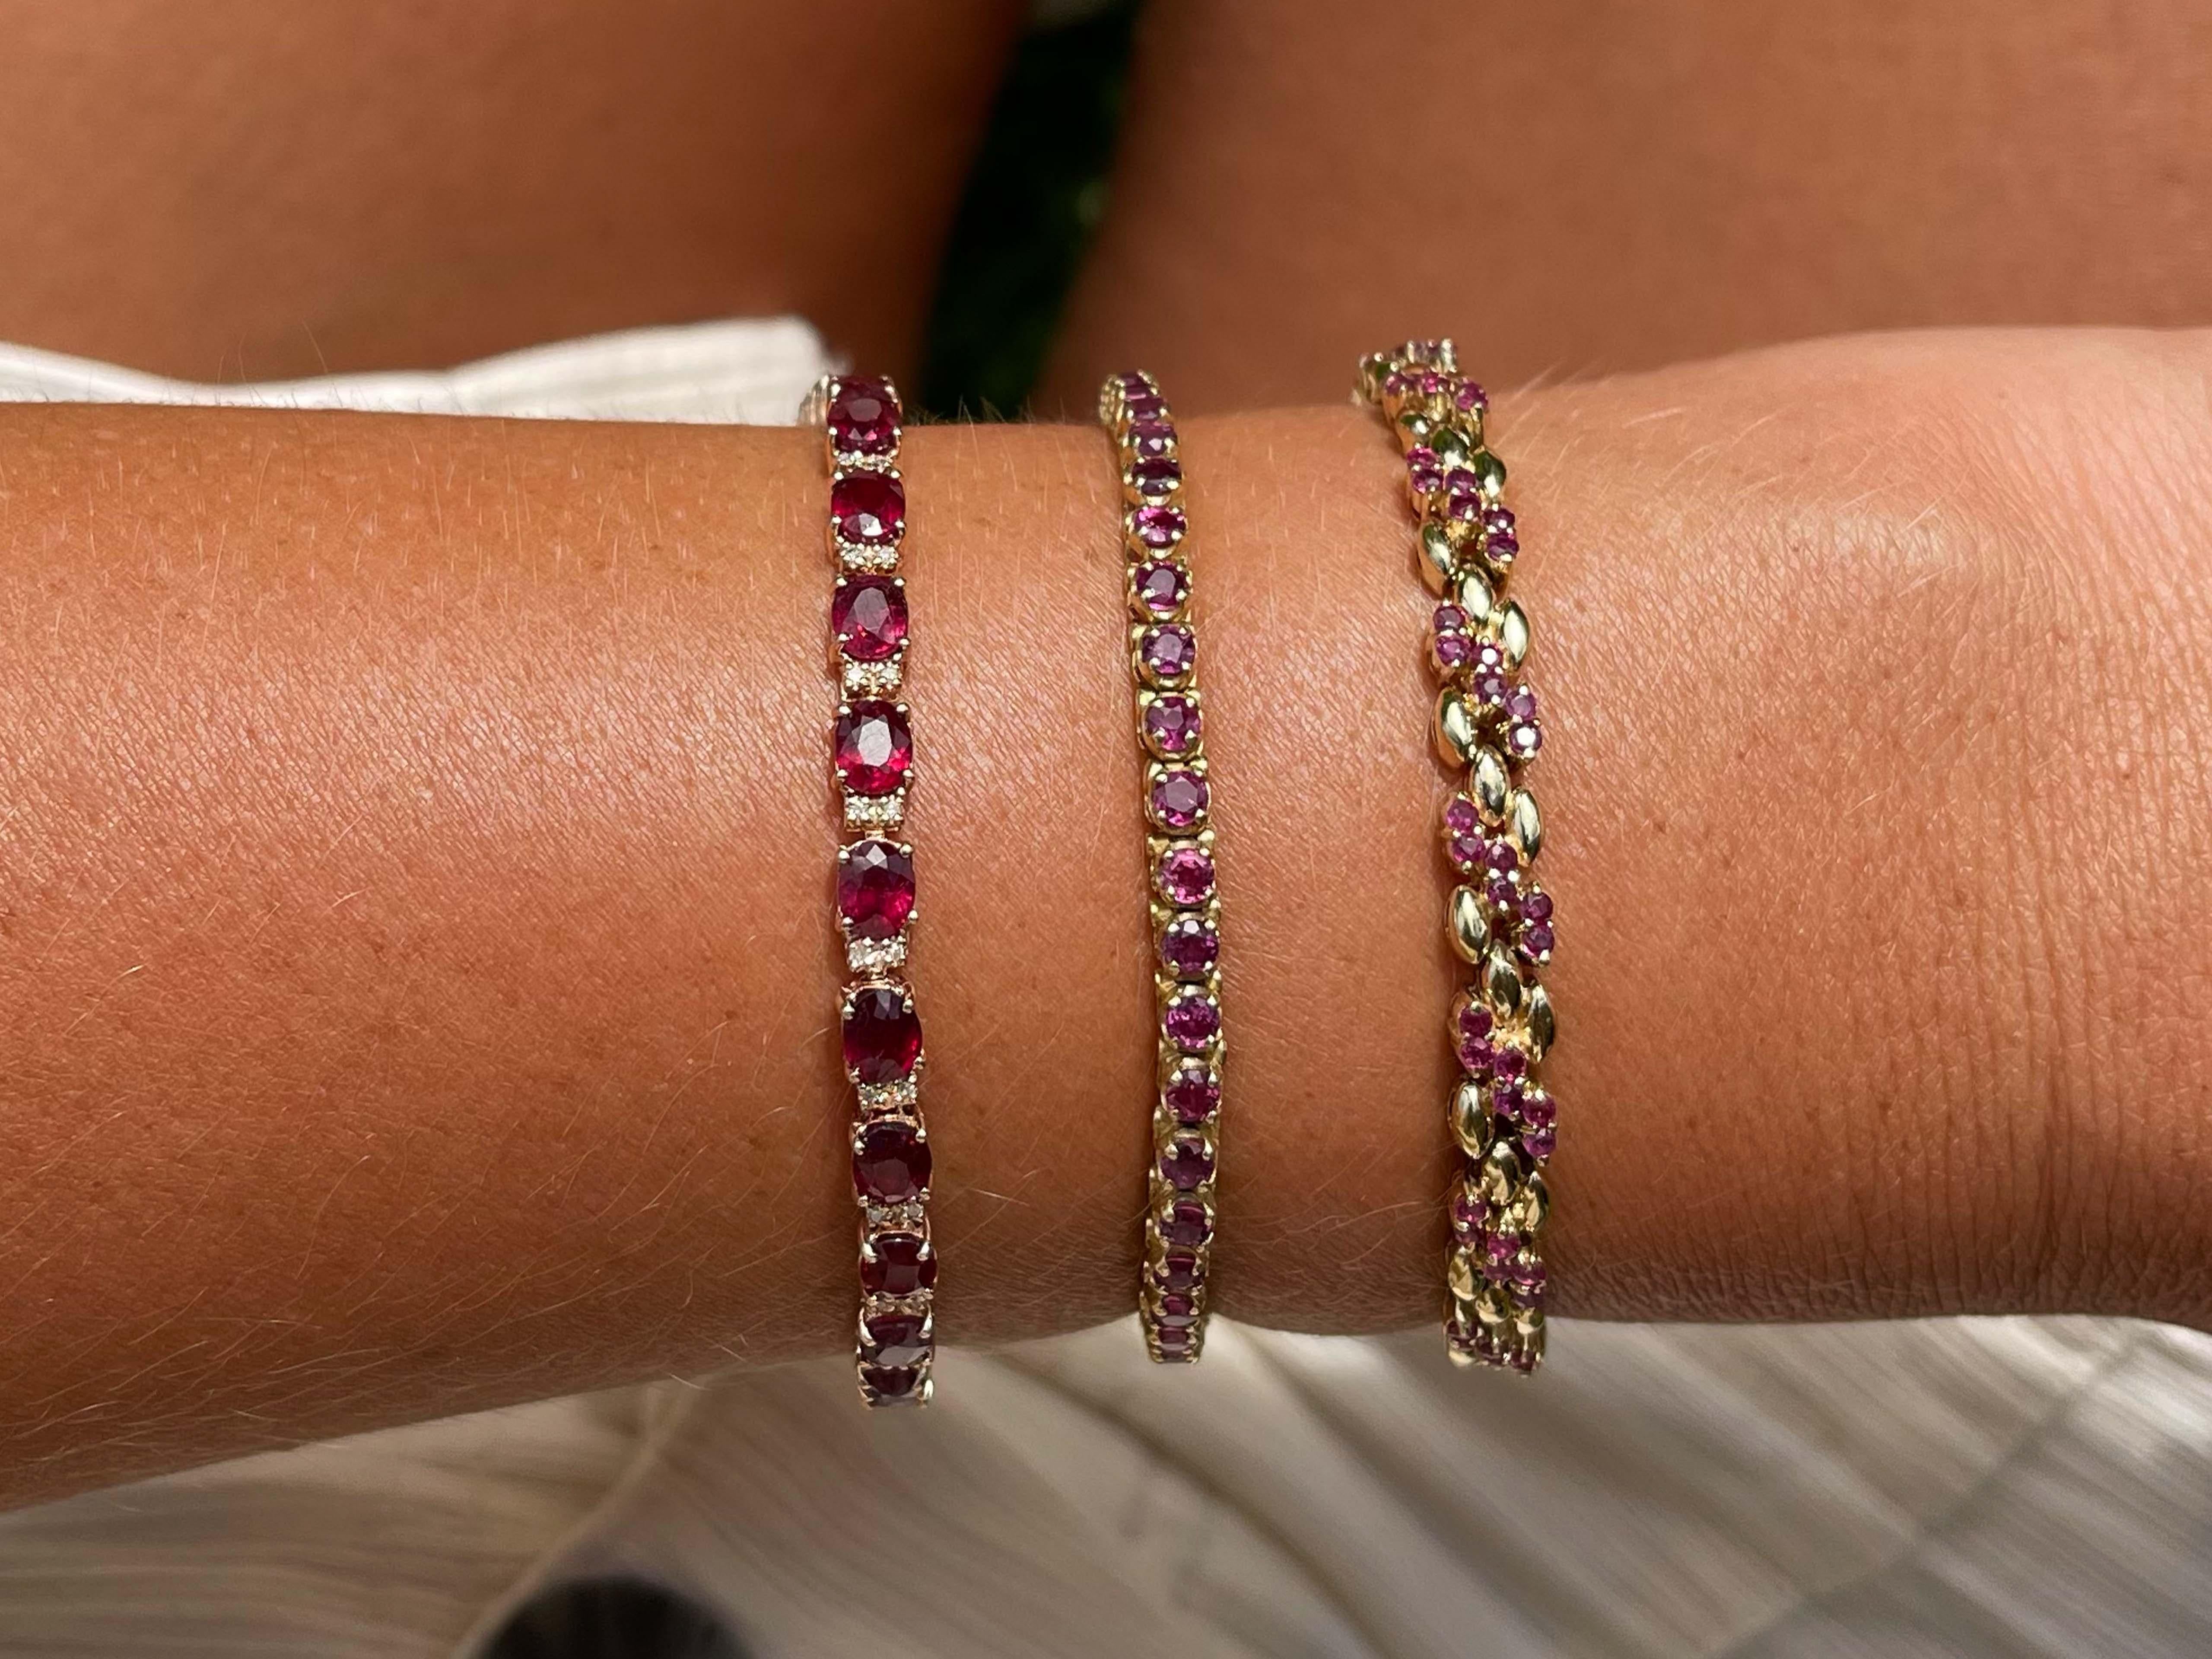 Bracelet Specifications:

Metal: 14k Yellow Gold

Gemstones: red rubies 

Red Ruby Carat Weight: 4.5 carats

Red Ruby Count: 47

Bracelet Length: ~7.00 inches

Bracelet Width: ~ 0.12